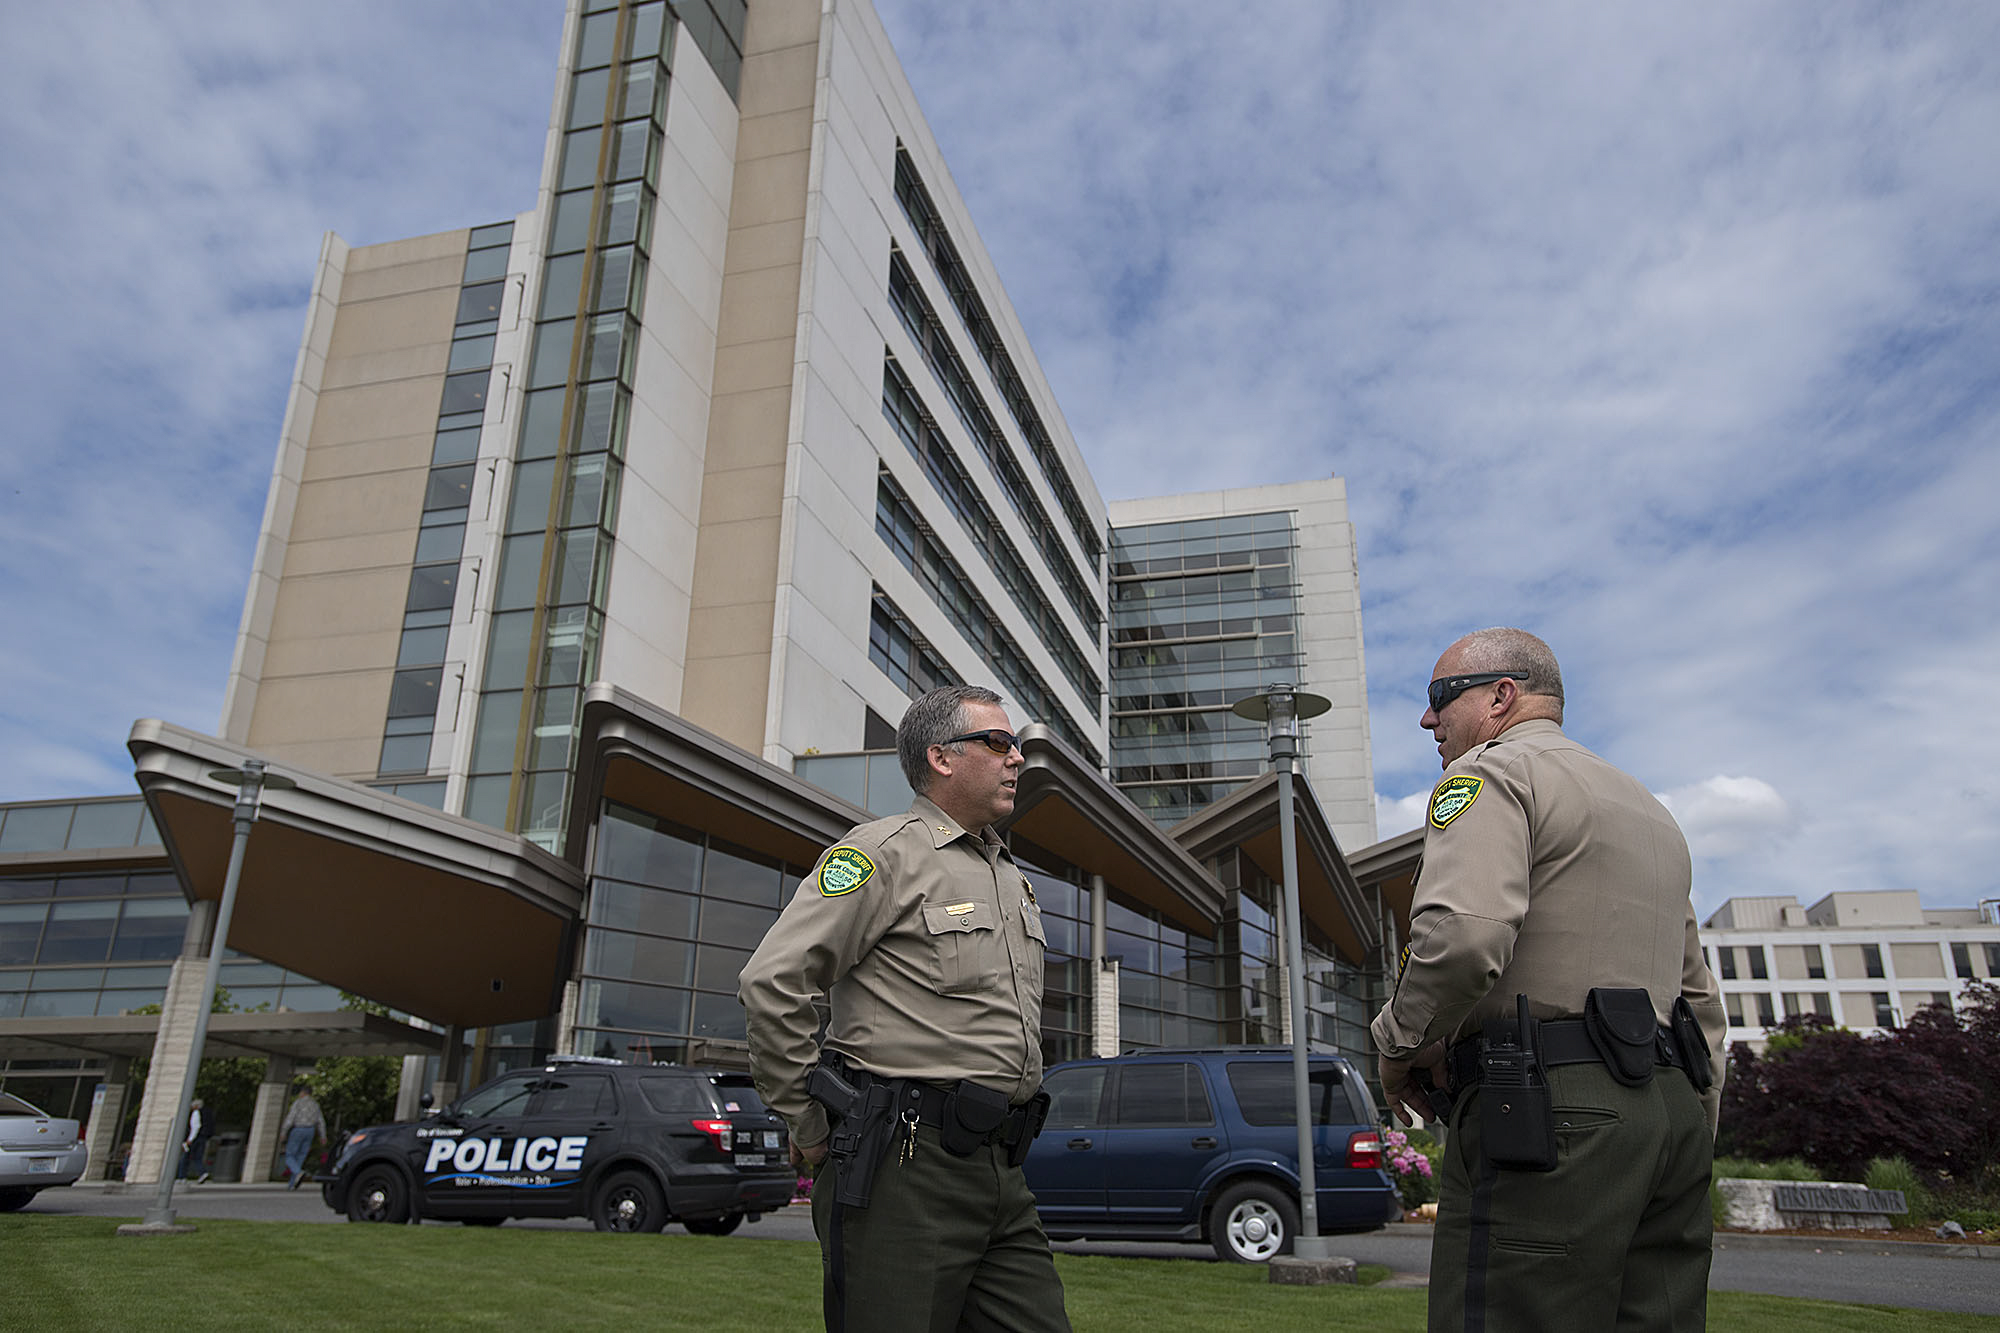 Undersheriff Mike Cooke of the Clark County Sheriff's Office, left, talks with Chief Criminal Deputy John Chapman as they respond to the scene of a shooting at PeaceHealth Southwest Medical Center on Thursday morning.